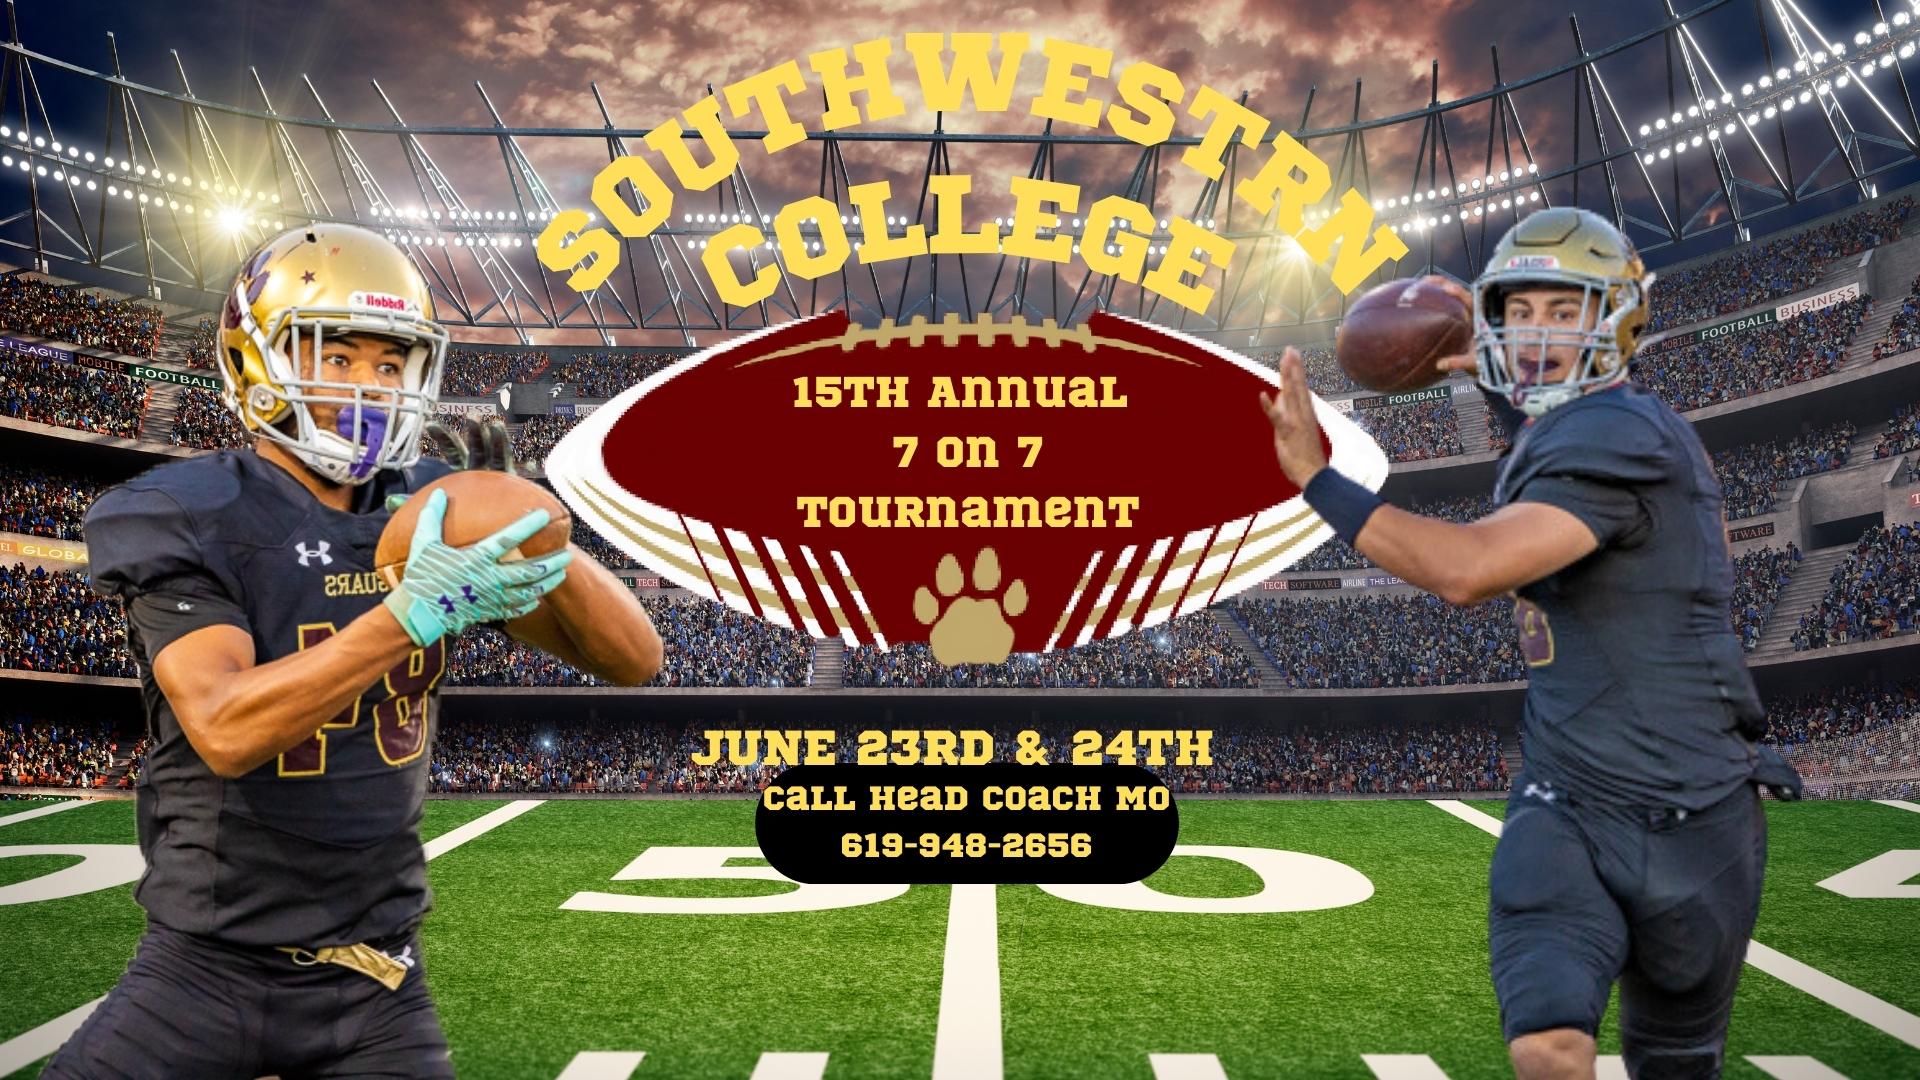 15th Annual South County Passing Tournament